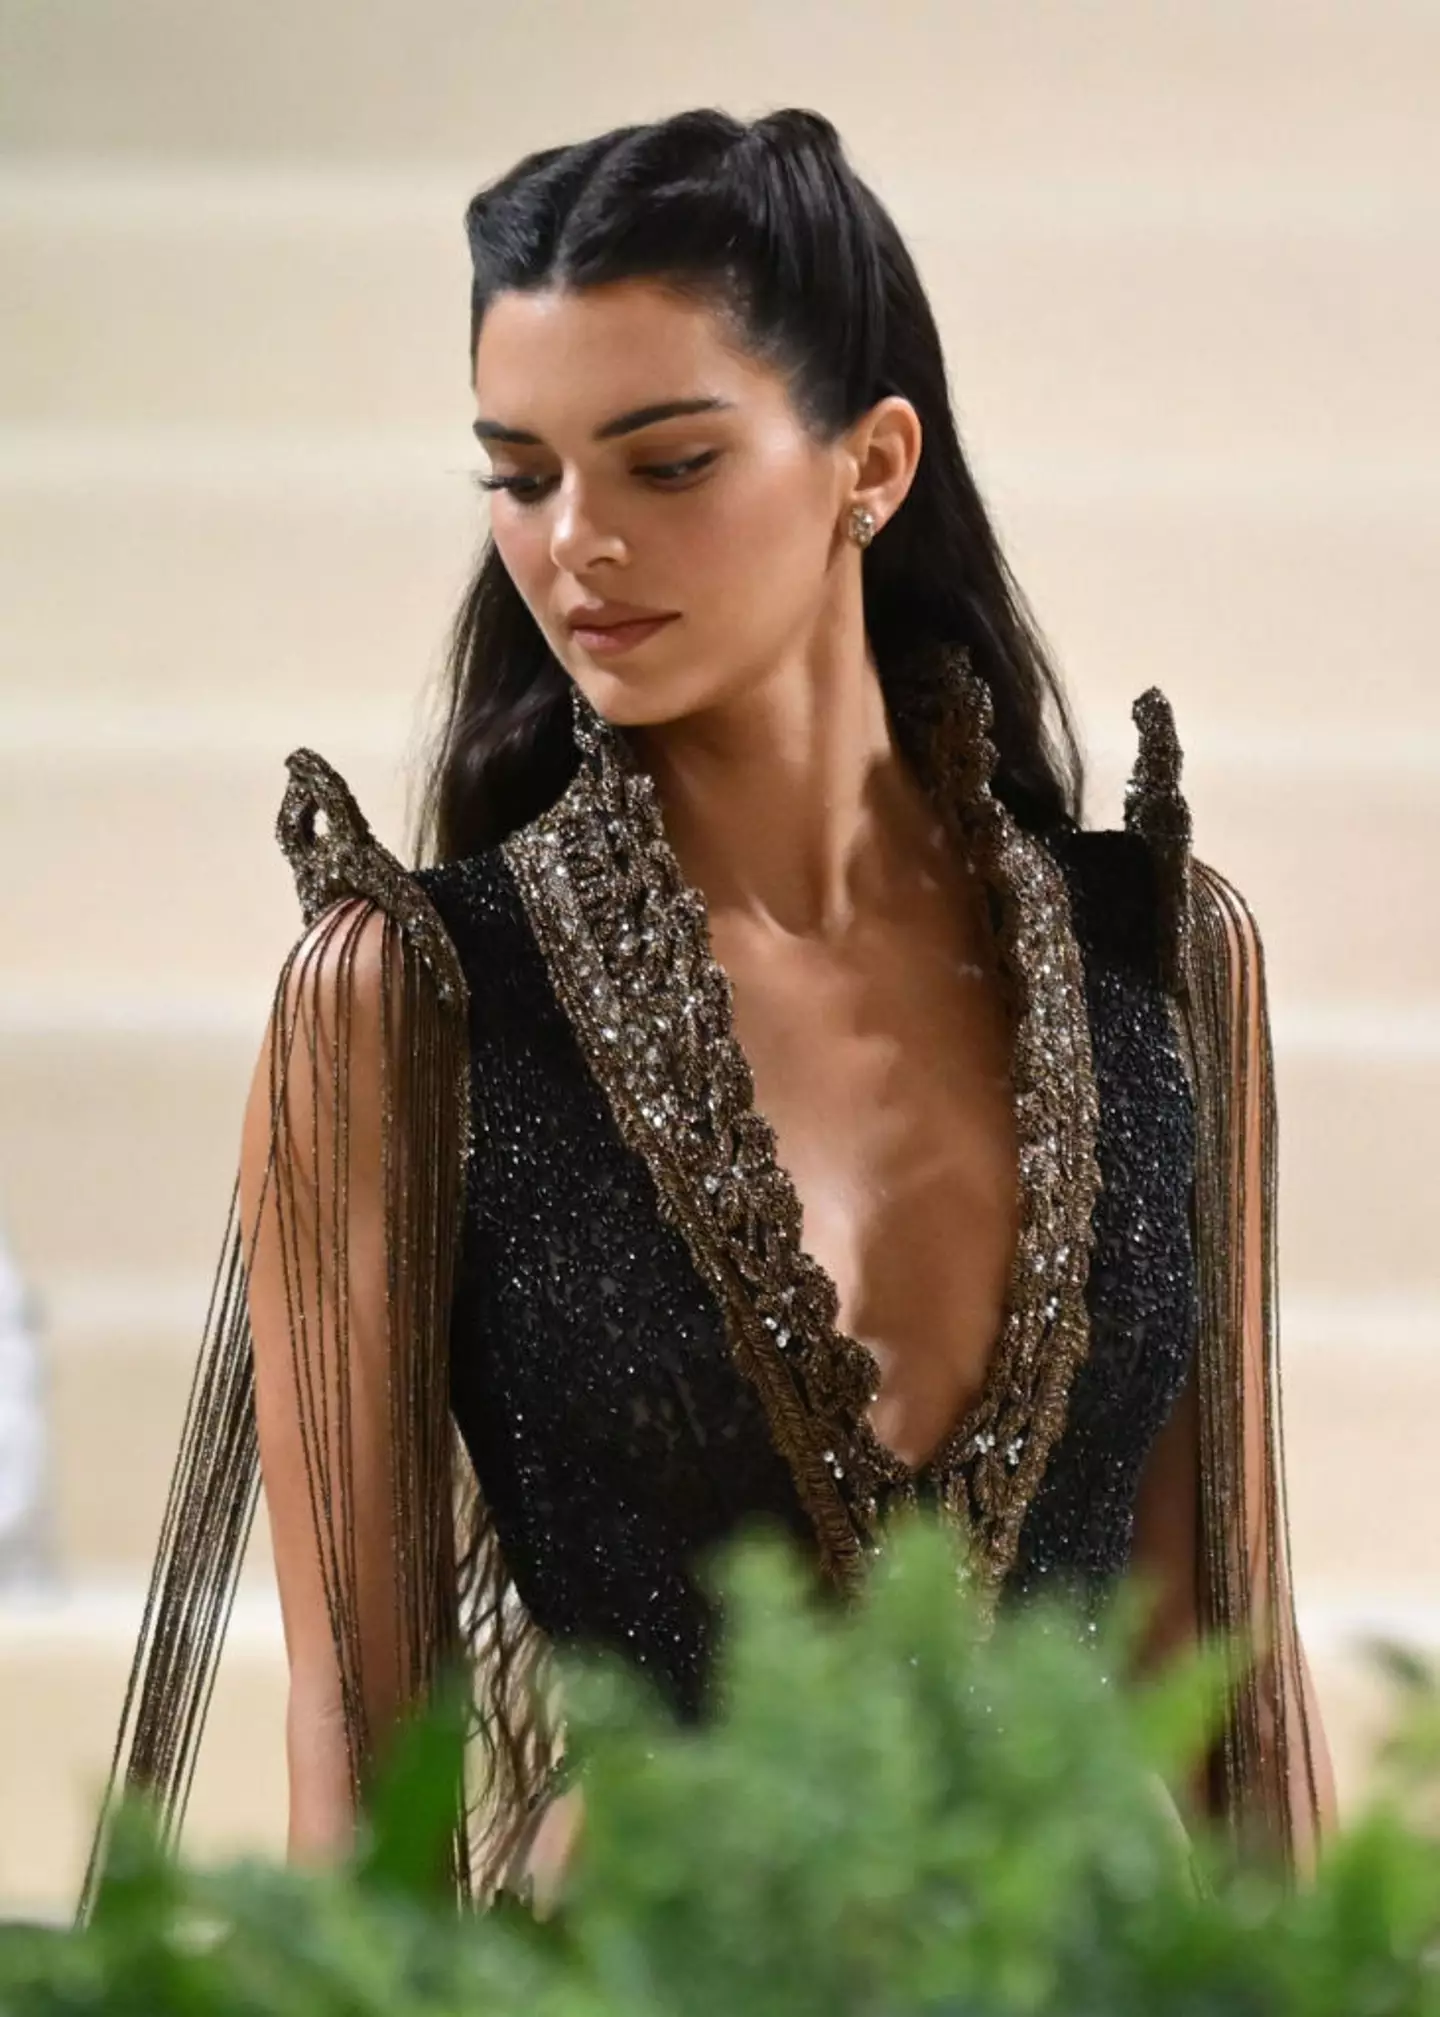 A body language expert claimed Kendall Jenner  had a particular behaviour that set her apart from her famous family. (NDZ/Star Max / Contributor / Getty Images)